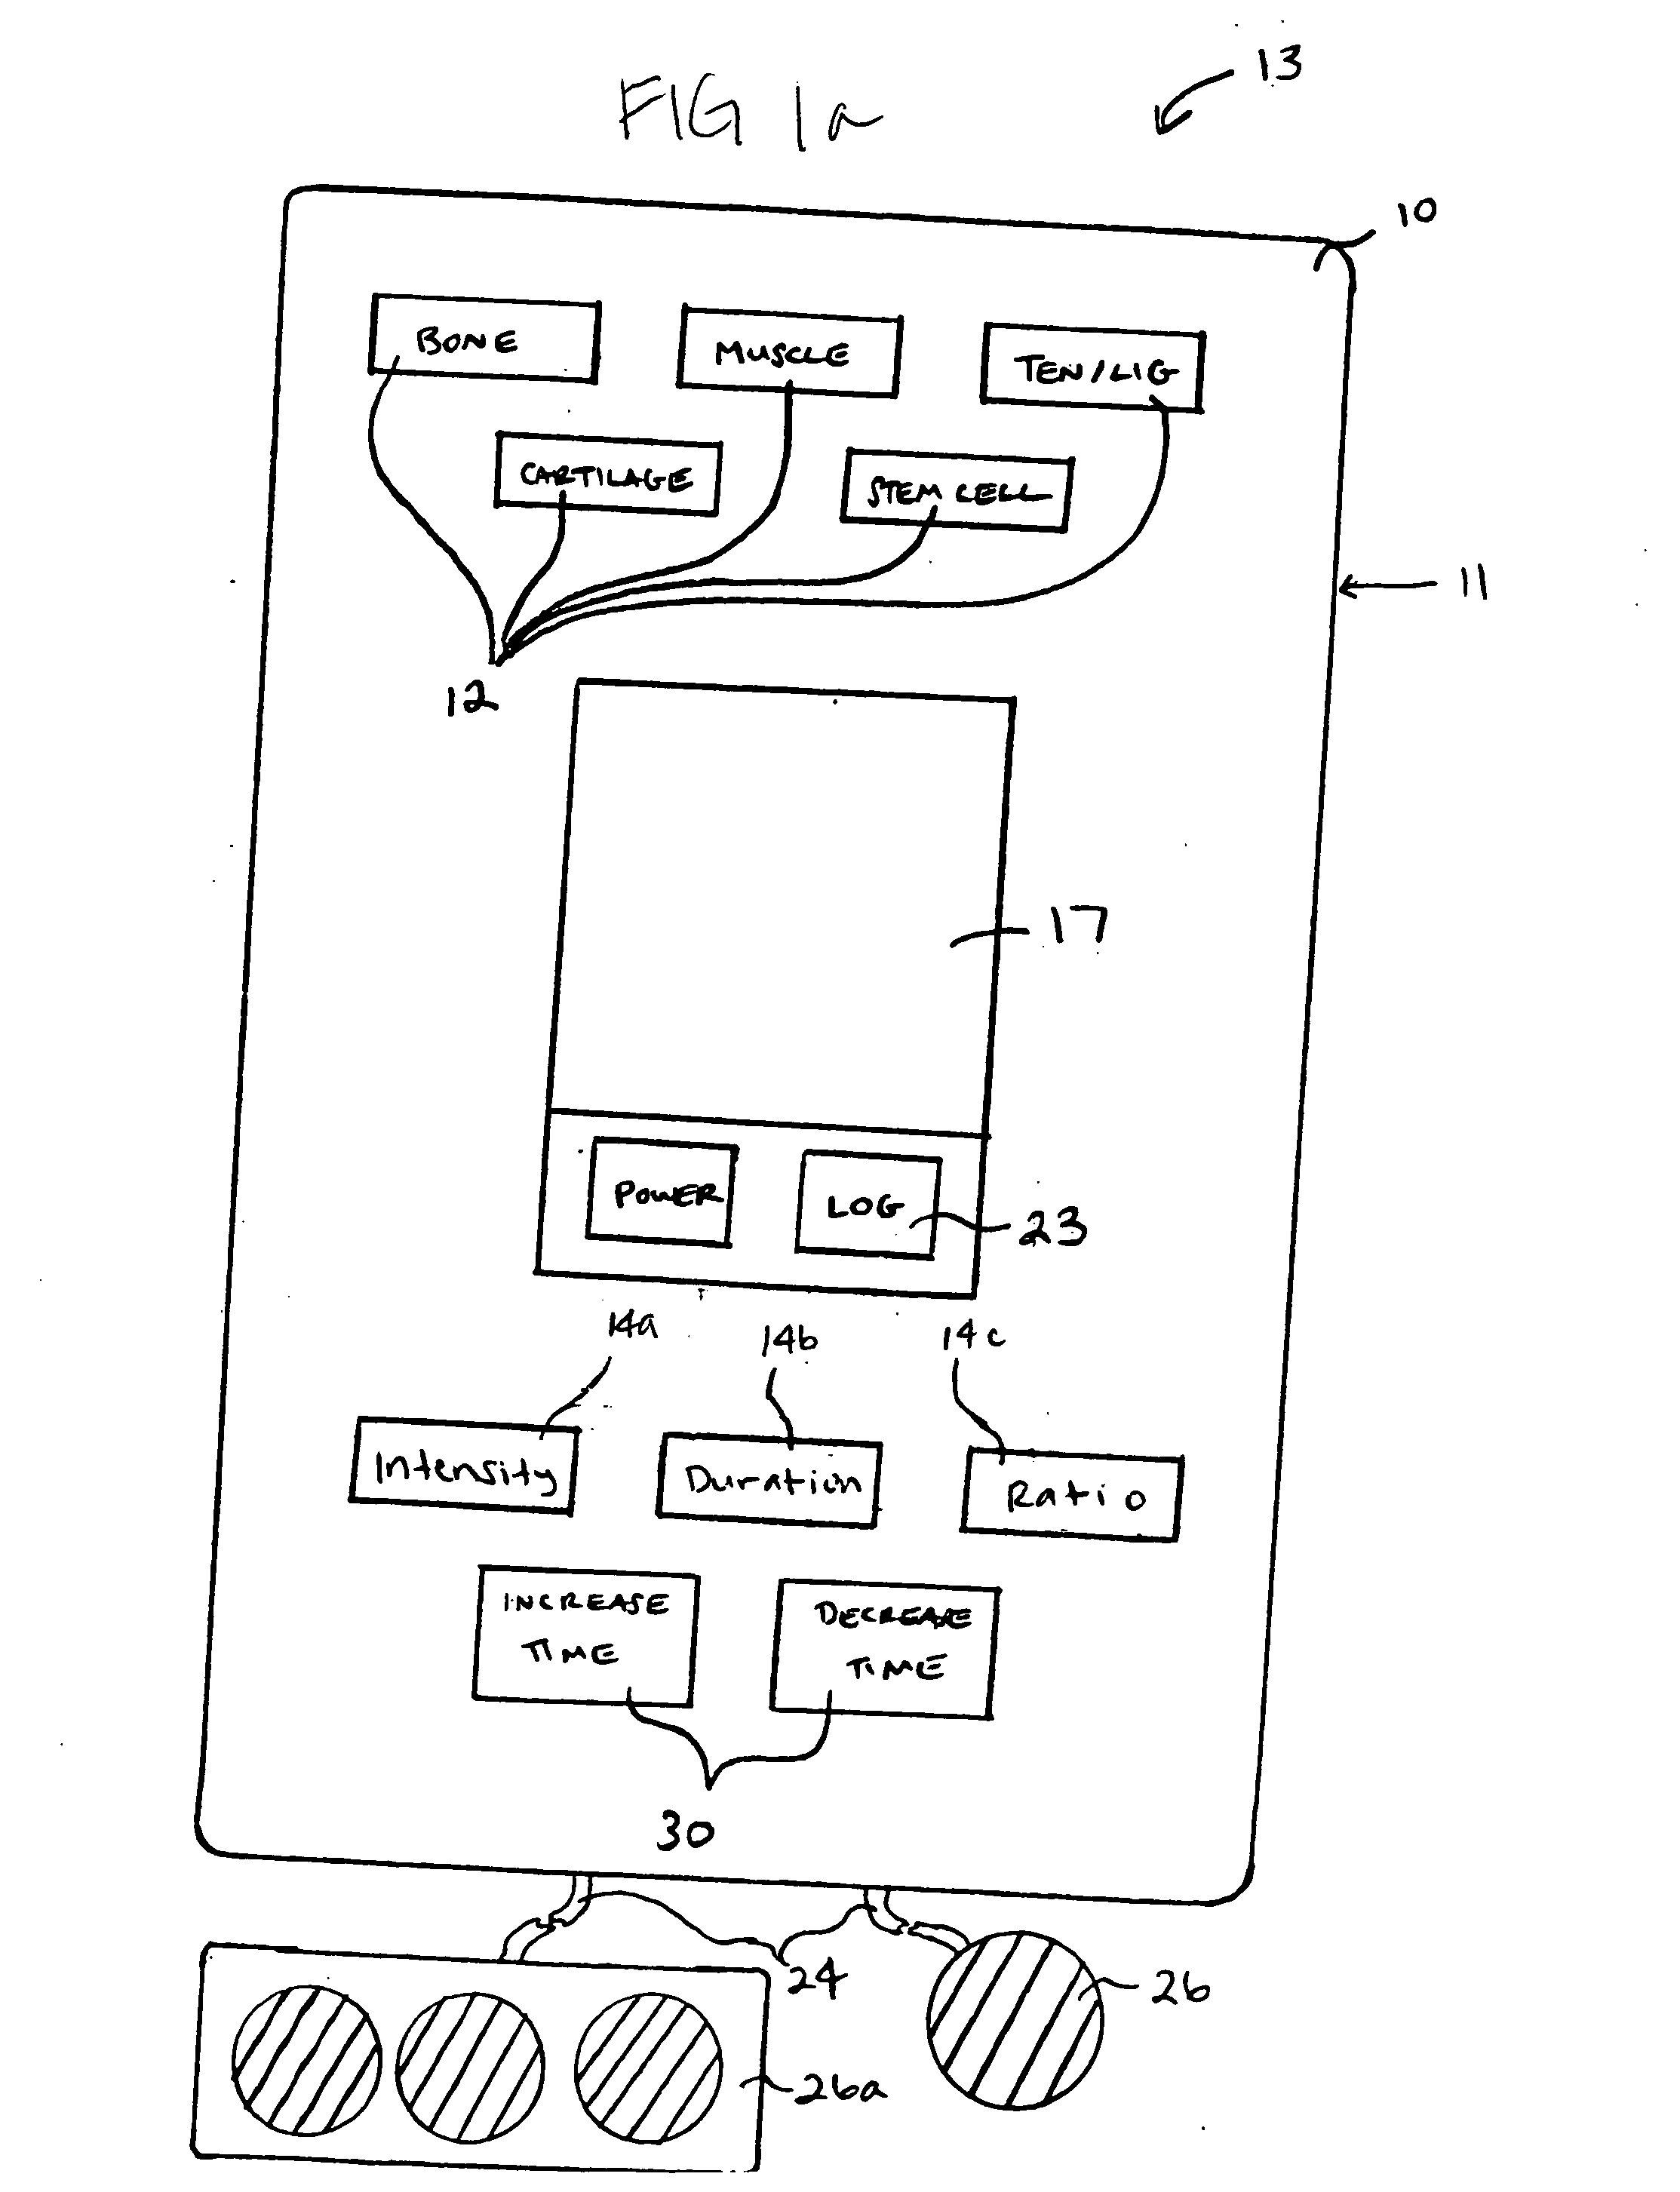 Apparatus and method for the static application of therapeutic ultrasound and stem cell therapy of living tissues